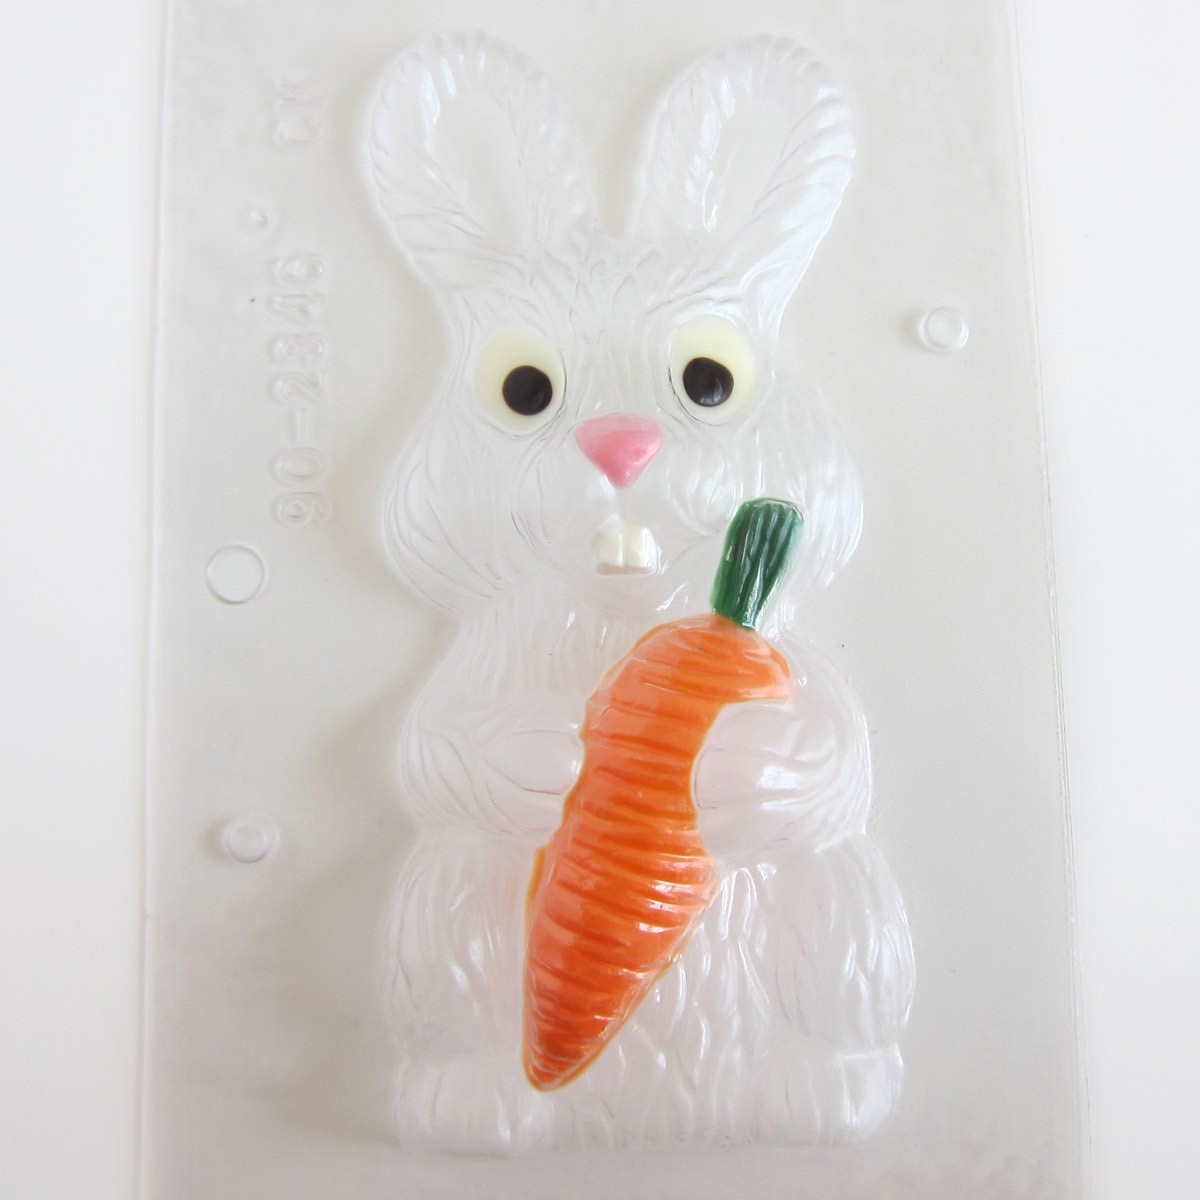 The bunny with carrot chocolate mold is painted with orange, green, white, and pink candy melts.